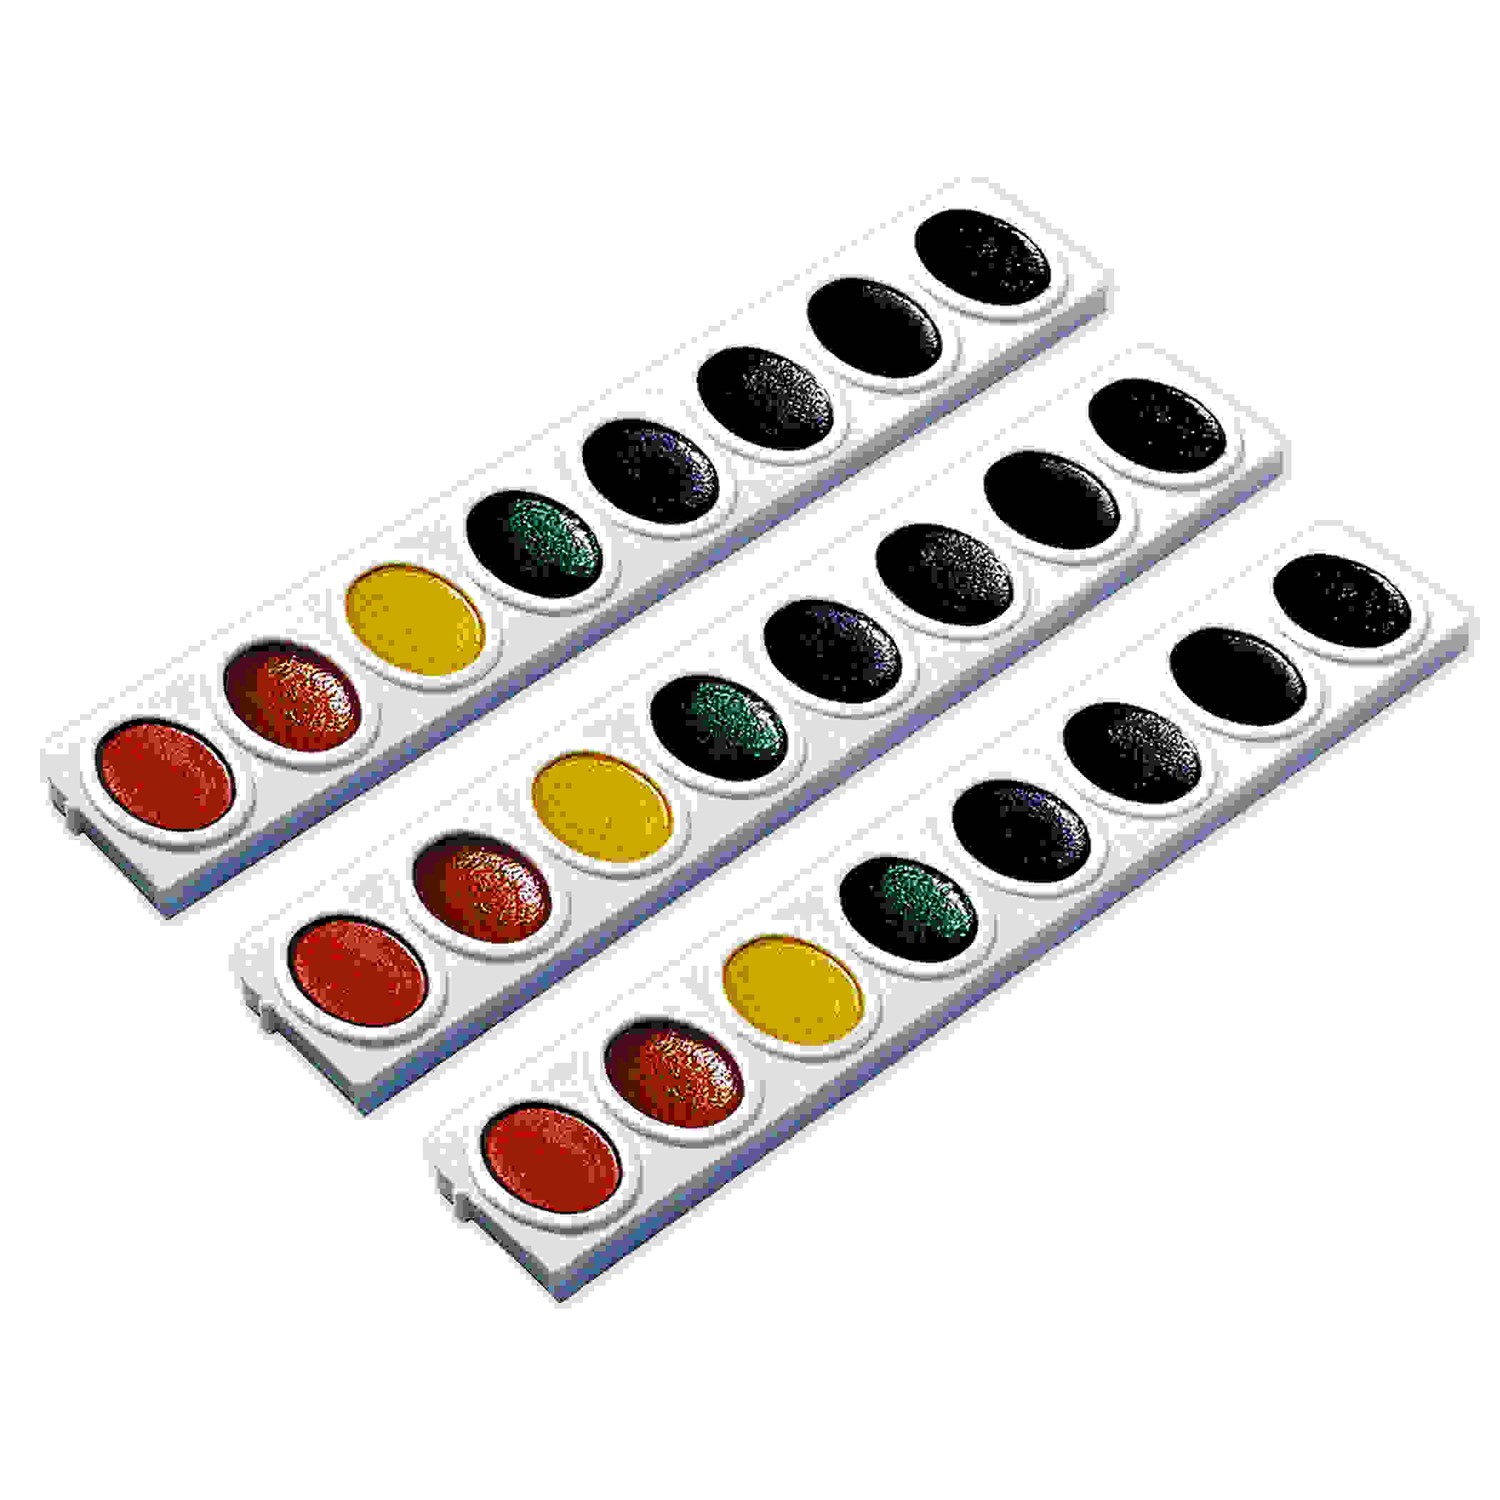 Watercolors, Oval Pan Refill Tray, 8 Colors Per Tray, 3 Trays